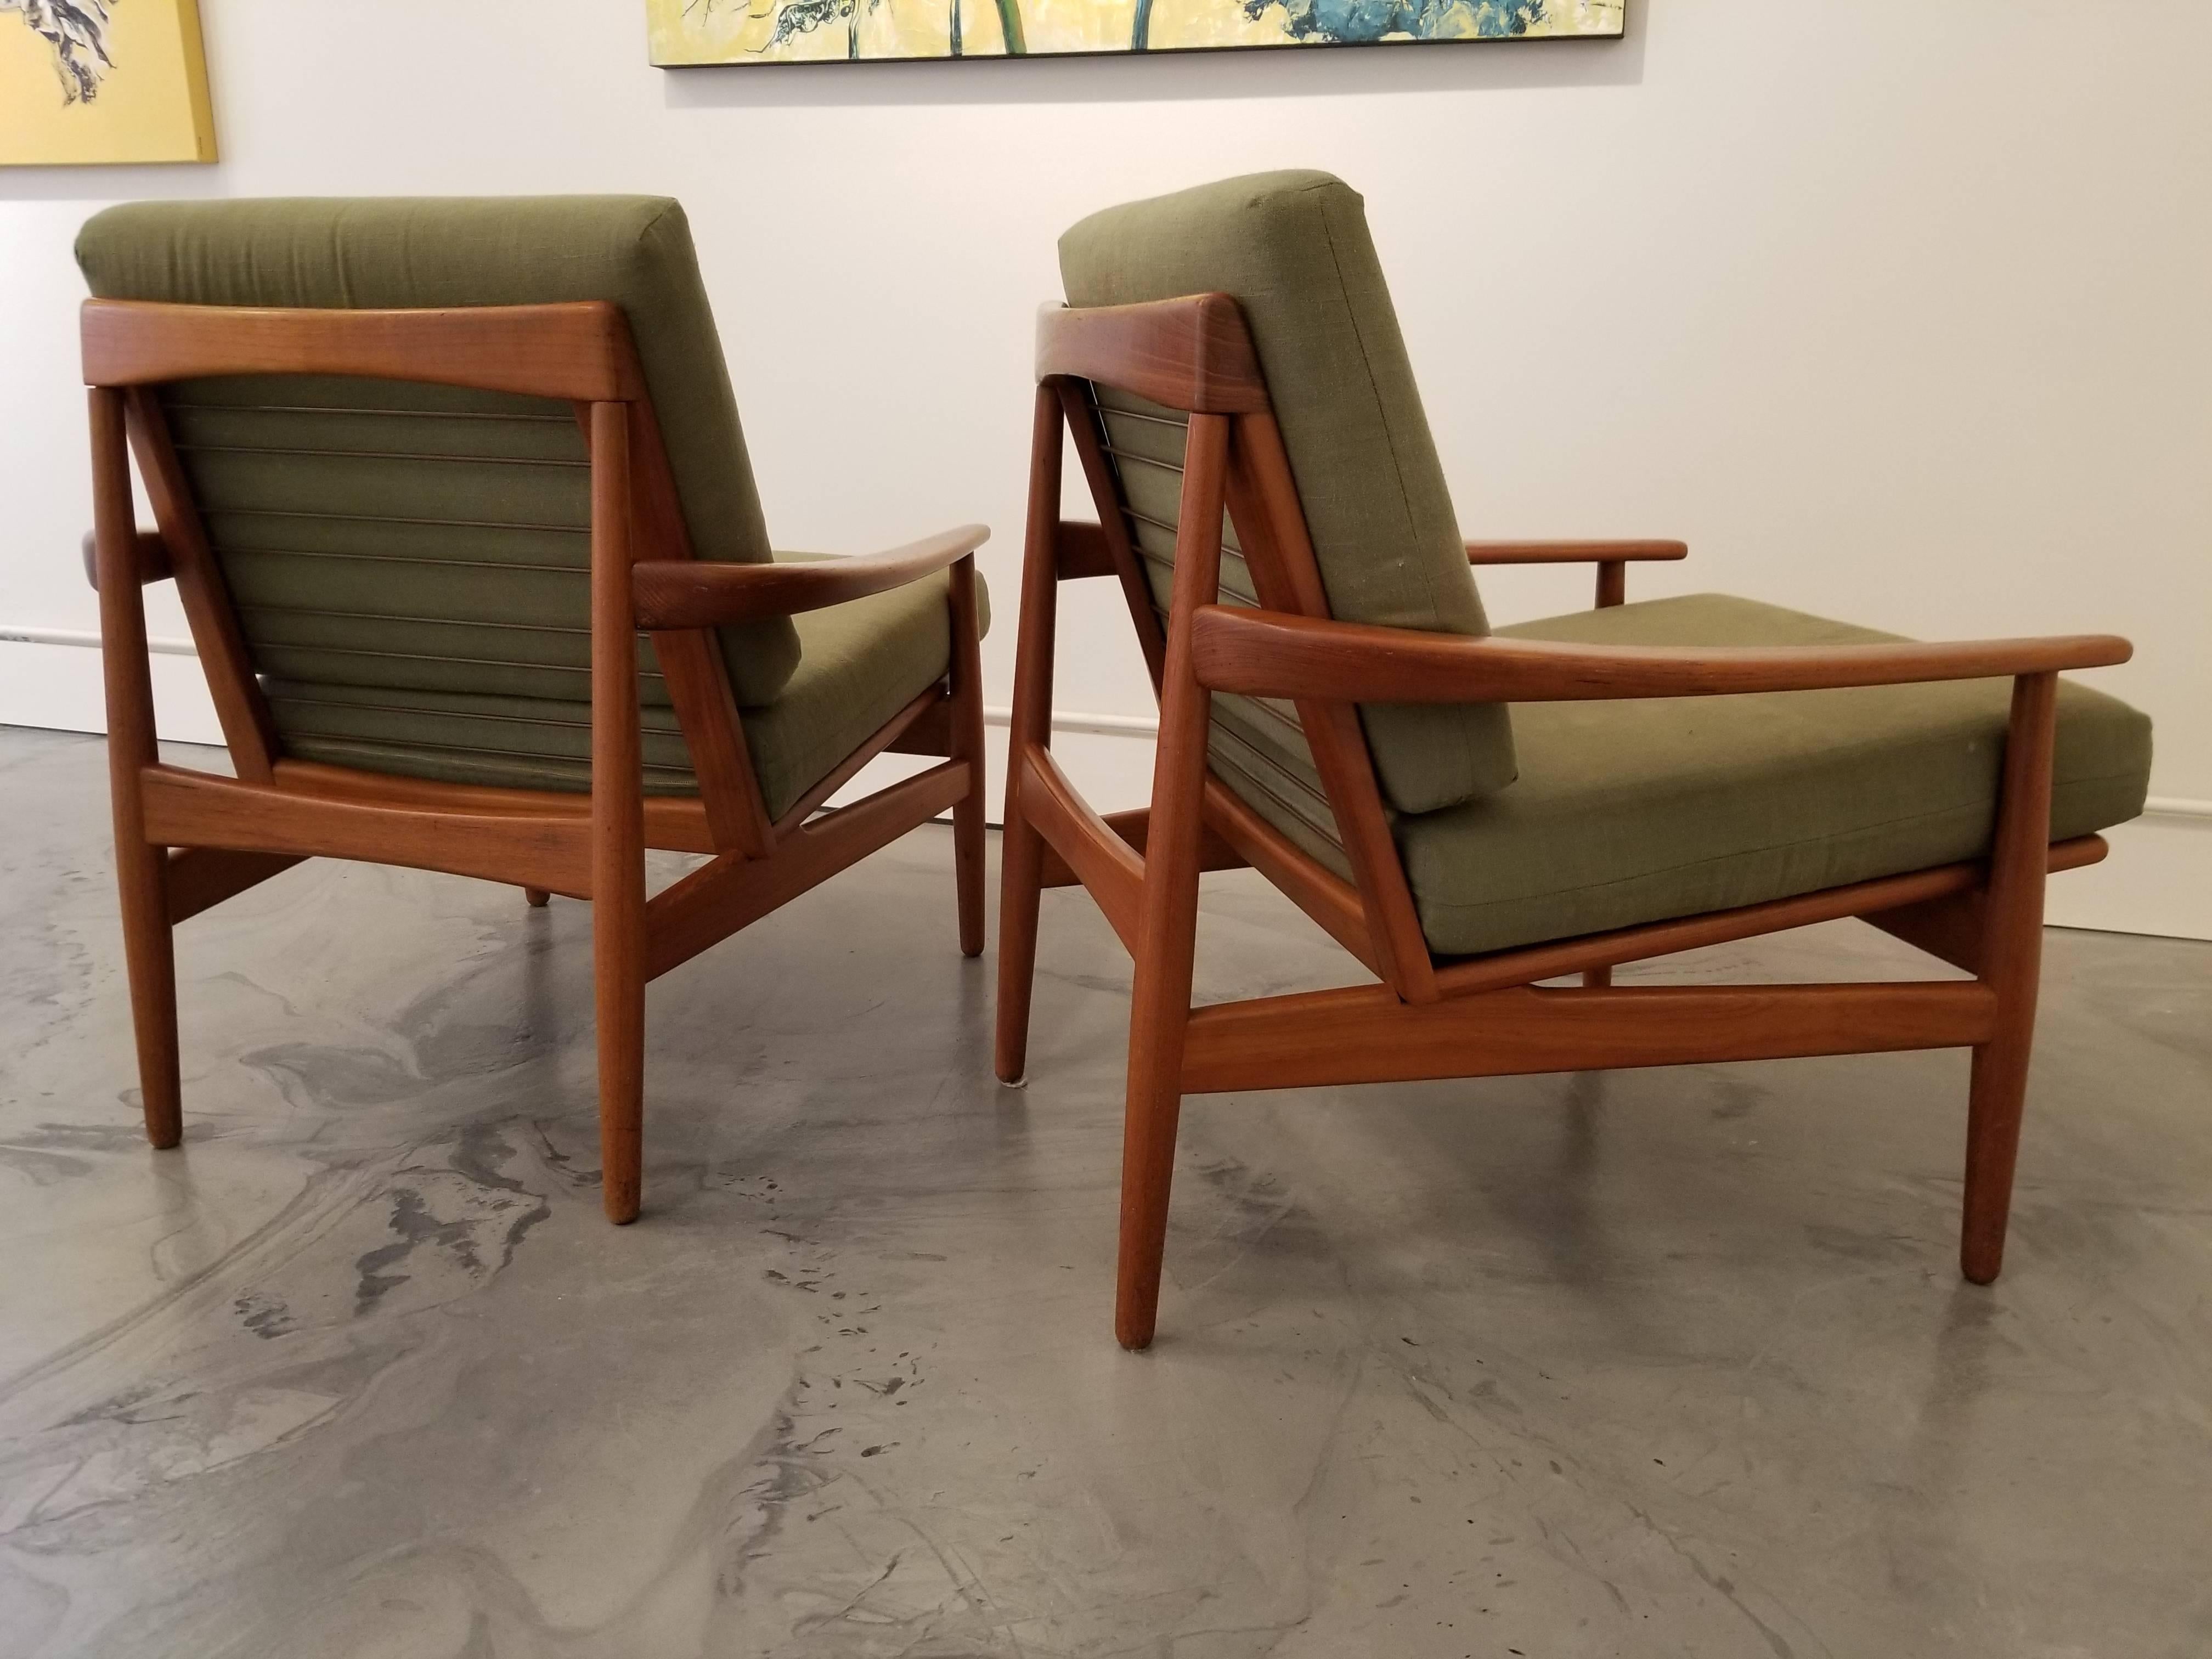 A fine pair of teak lounge chairs with exceptional craftsmanship to teak frames. Nice glow to original finish.